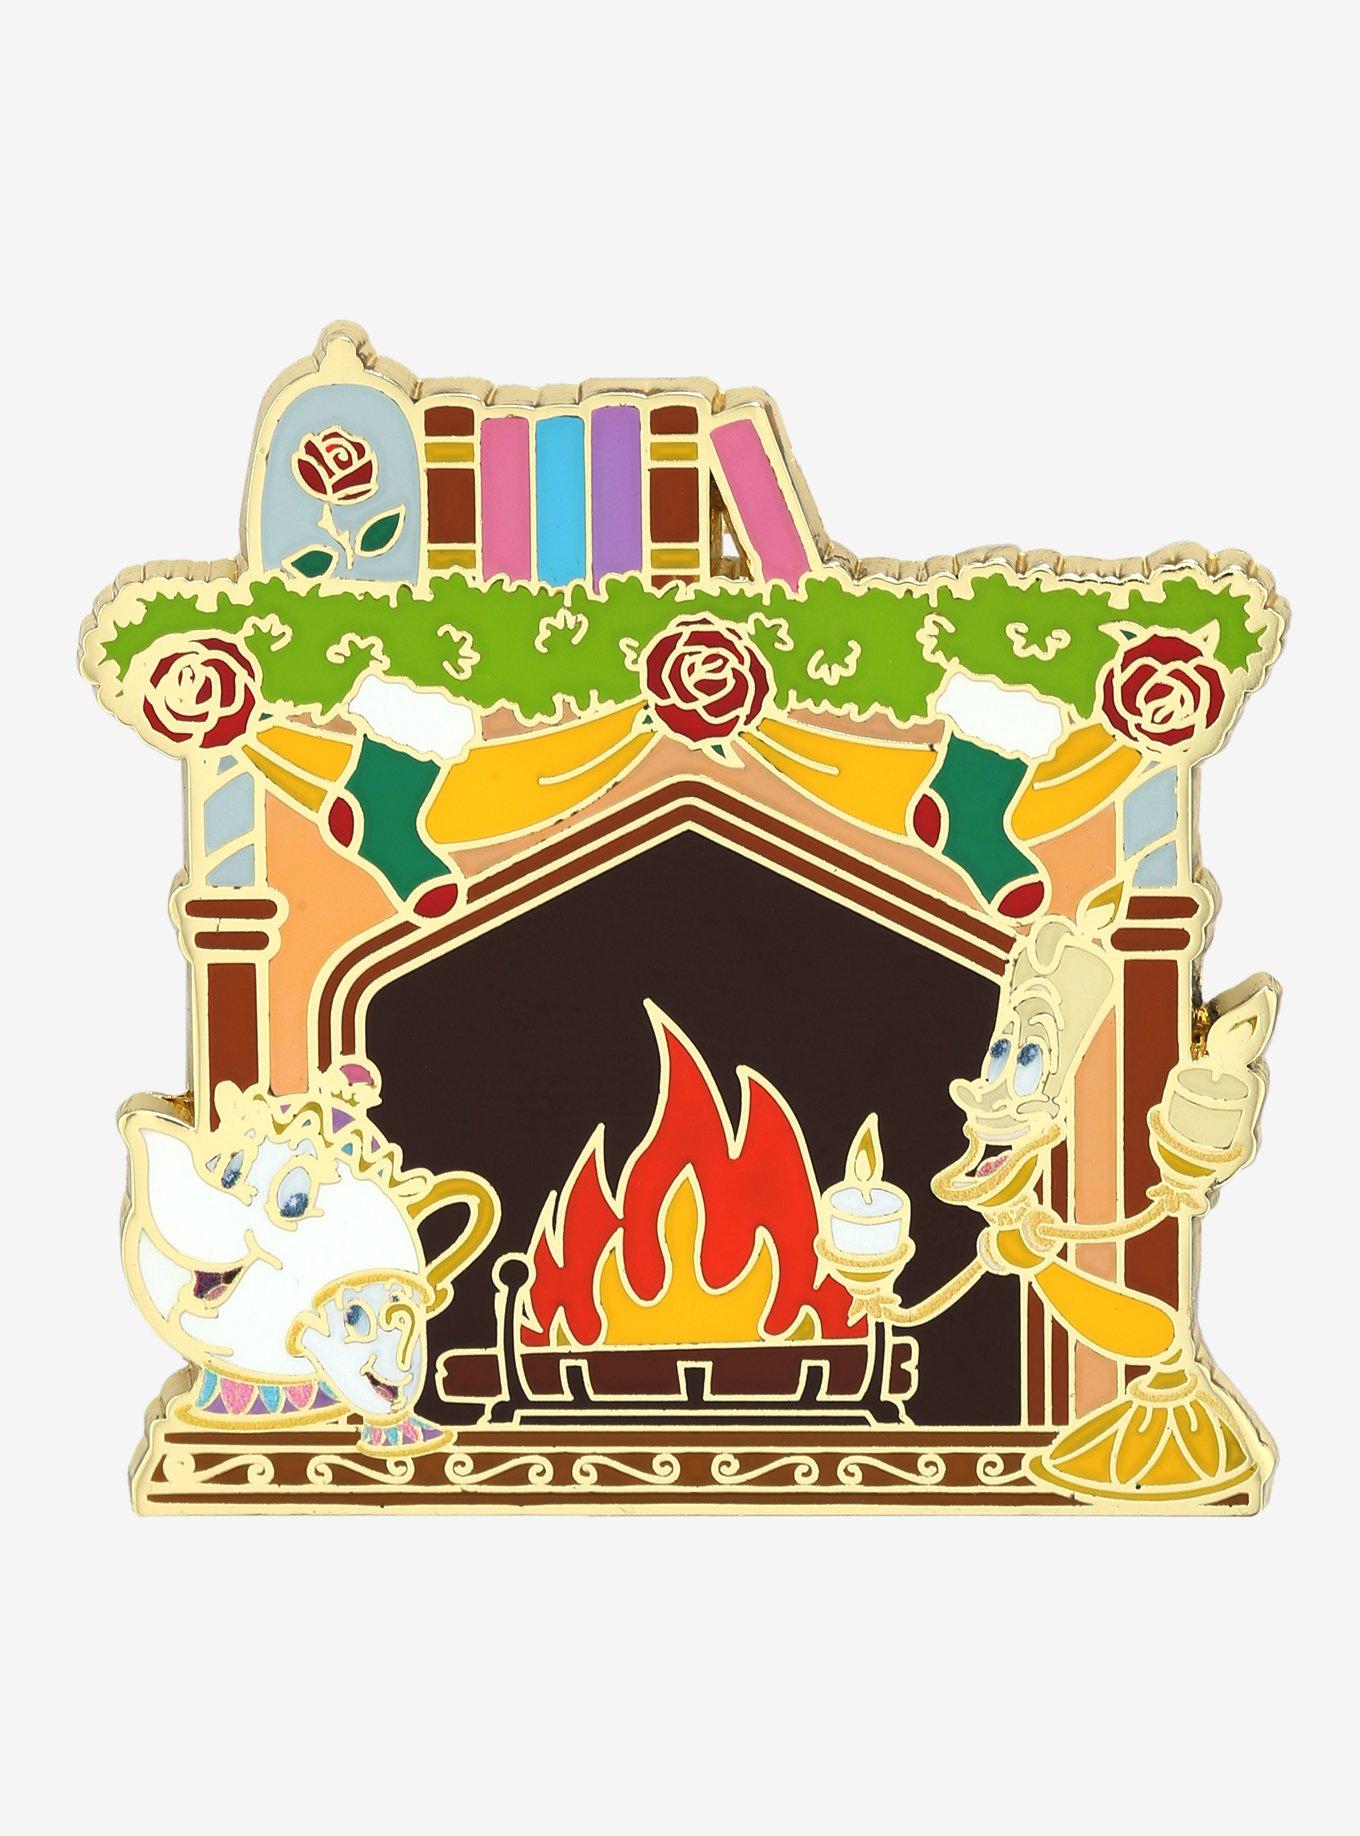 Disney Beauty and the Beast Holiday Fireplace Enamel Pin - BoxLunch Exclusive, , hi-res